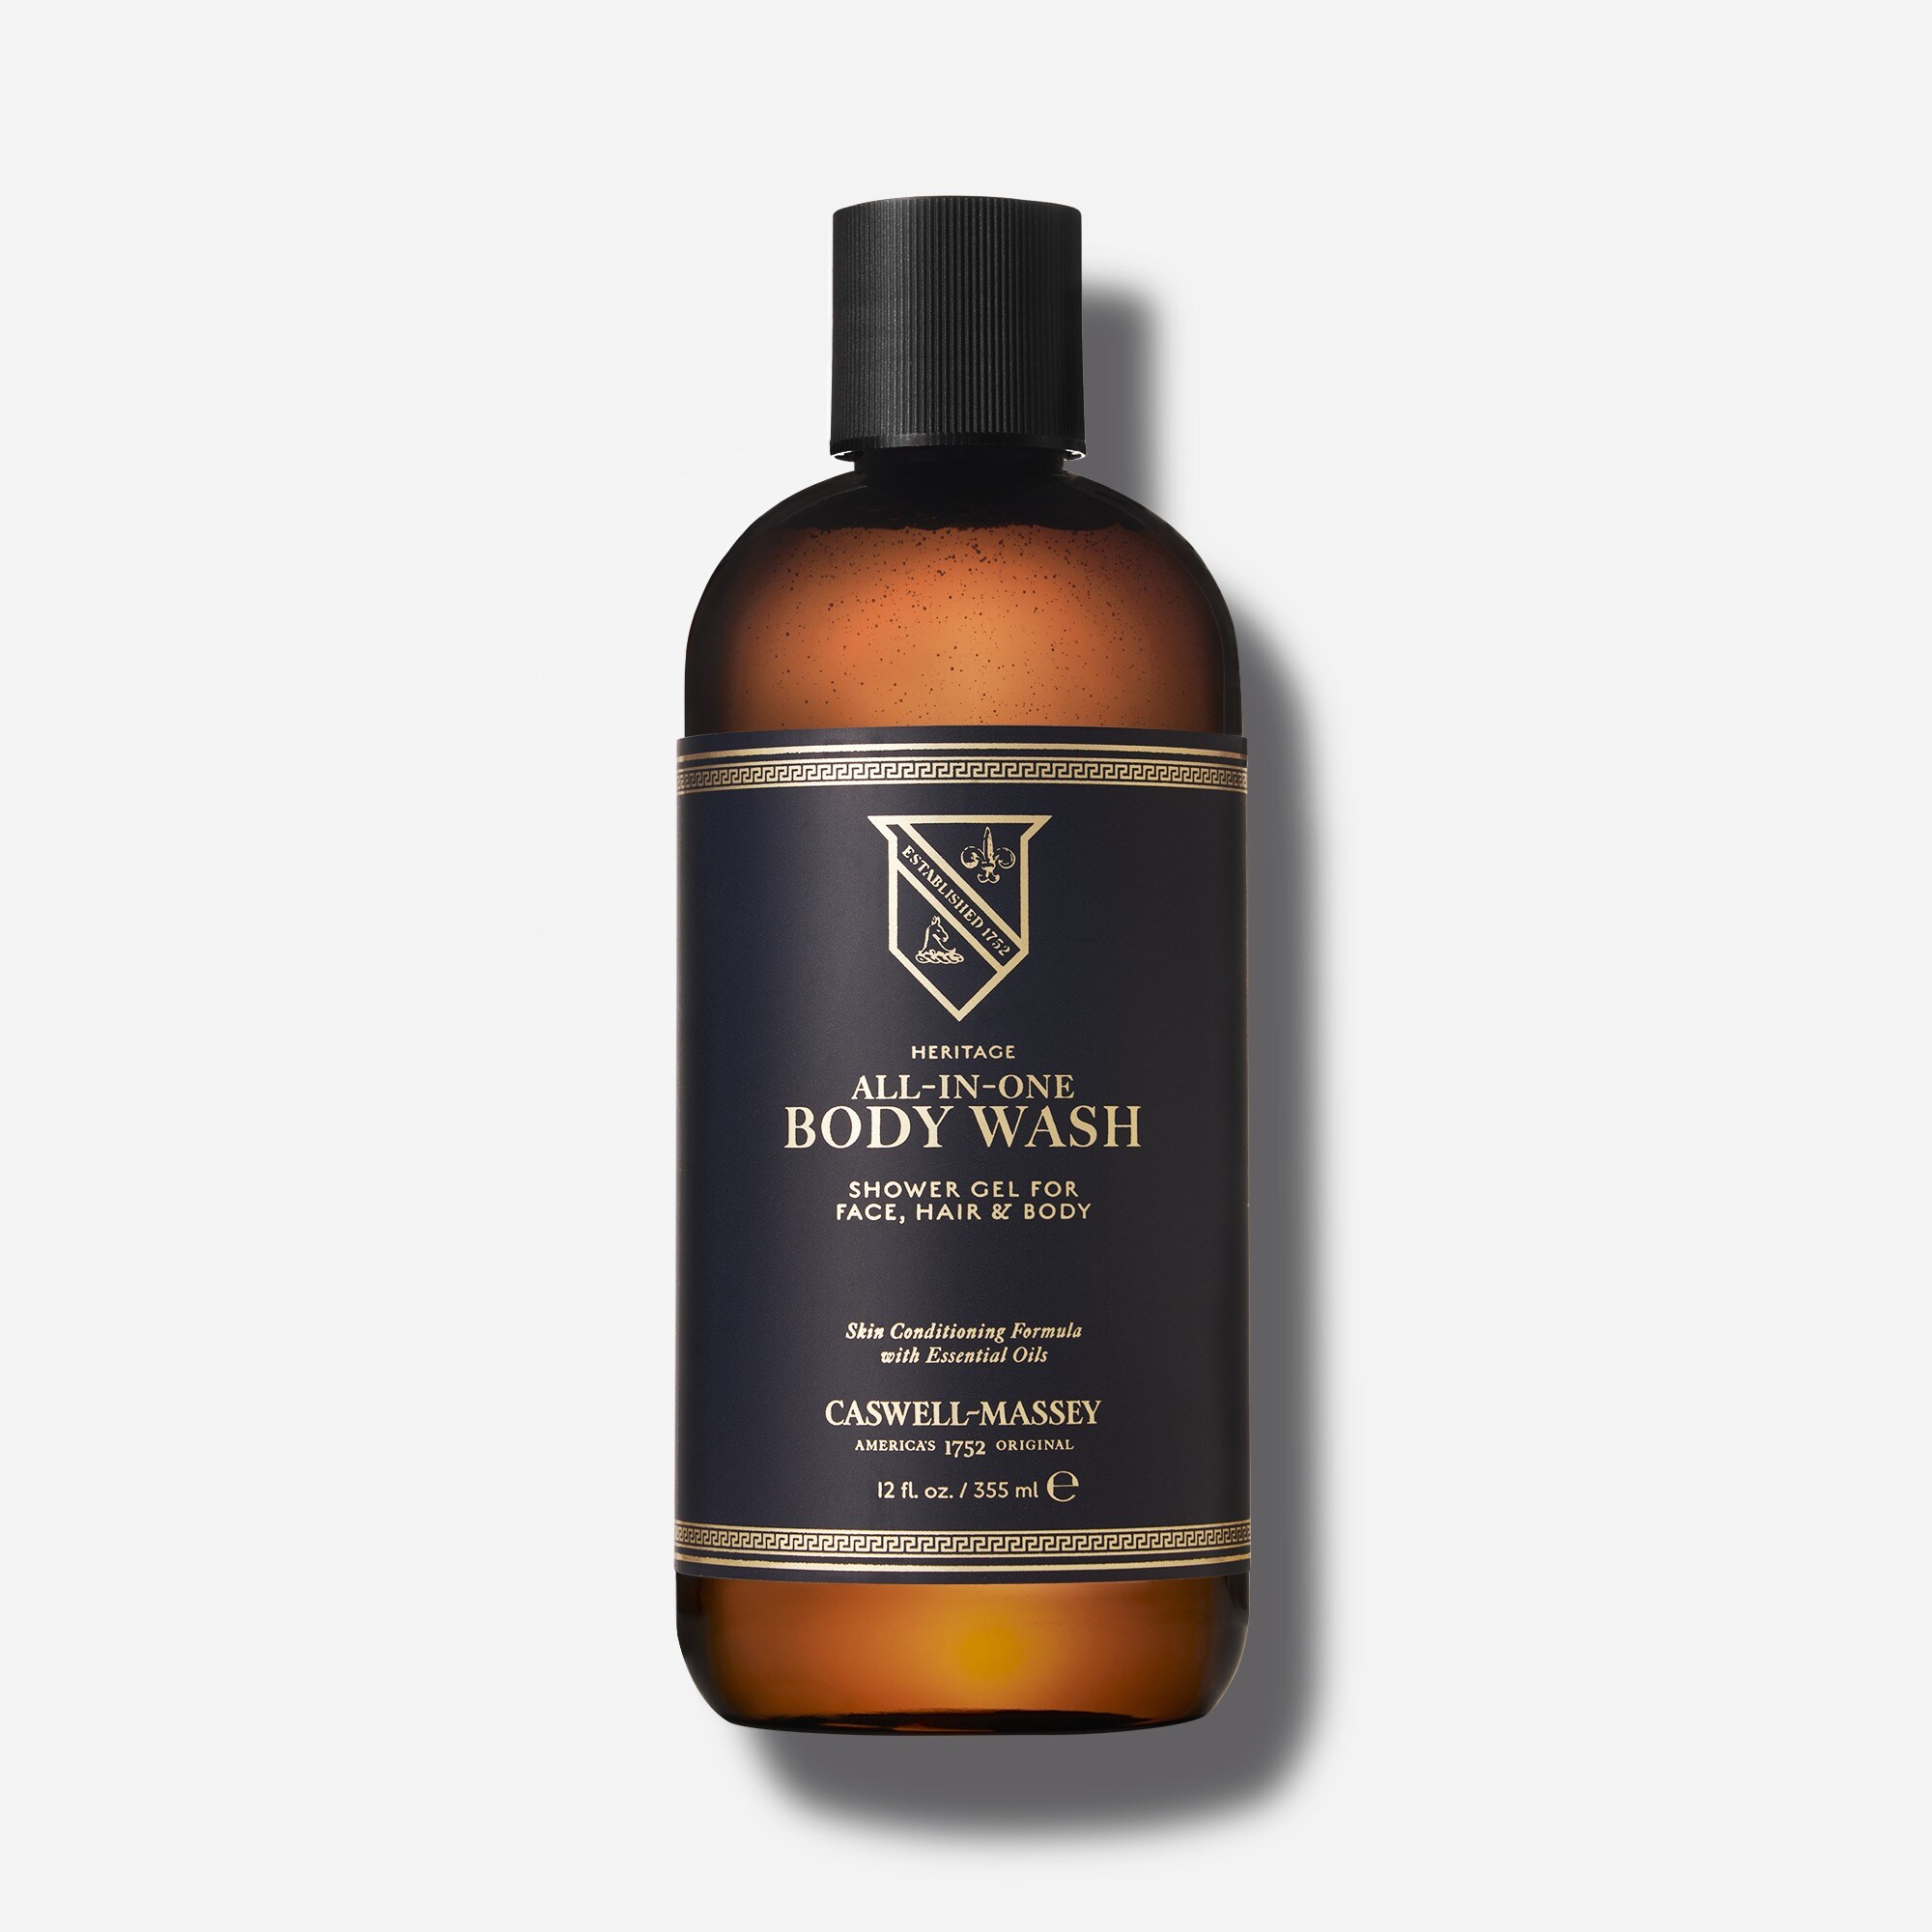  Caswell-Massey heritage all-in-one body wash